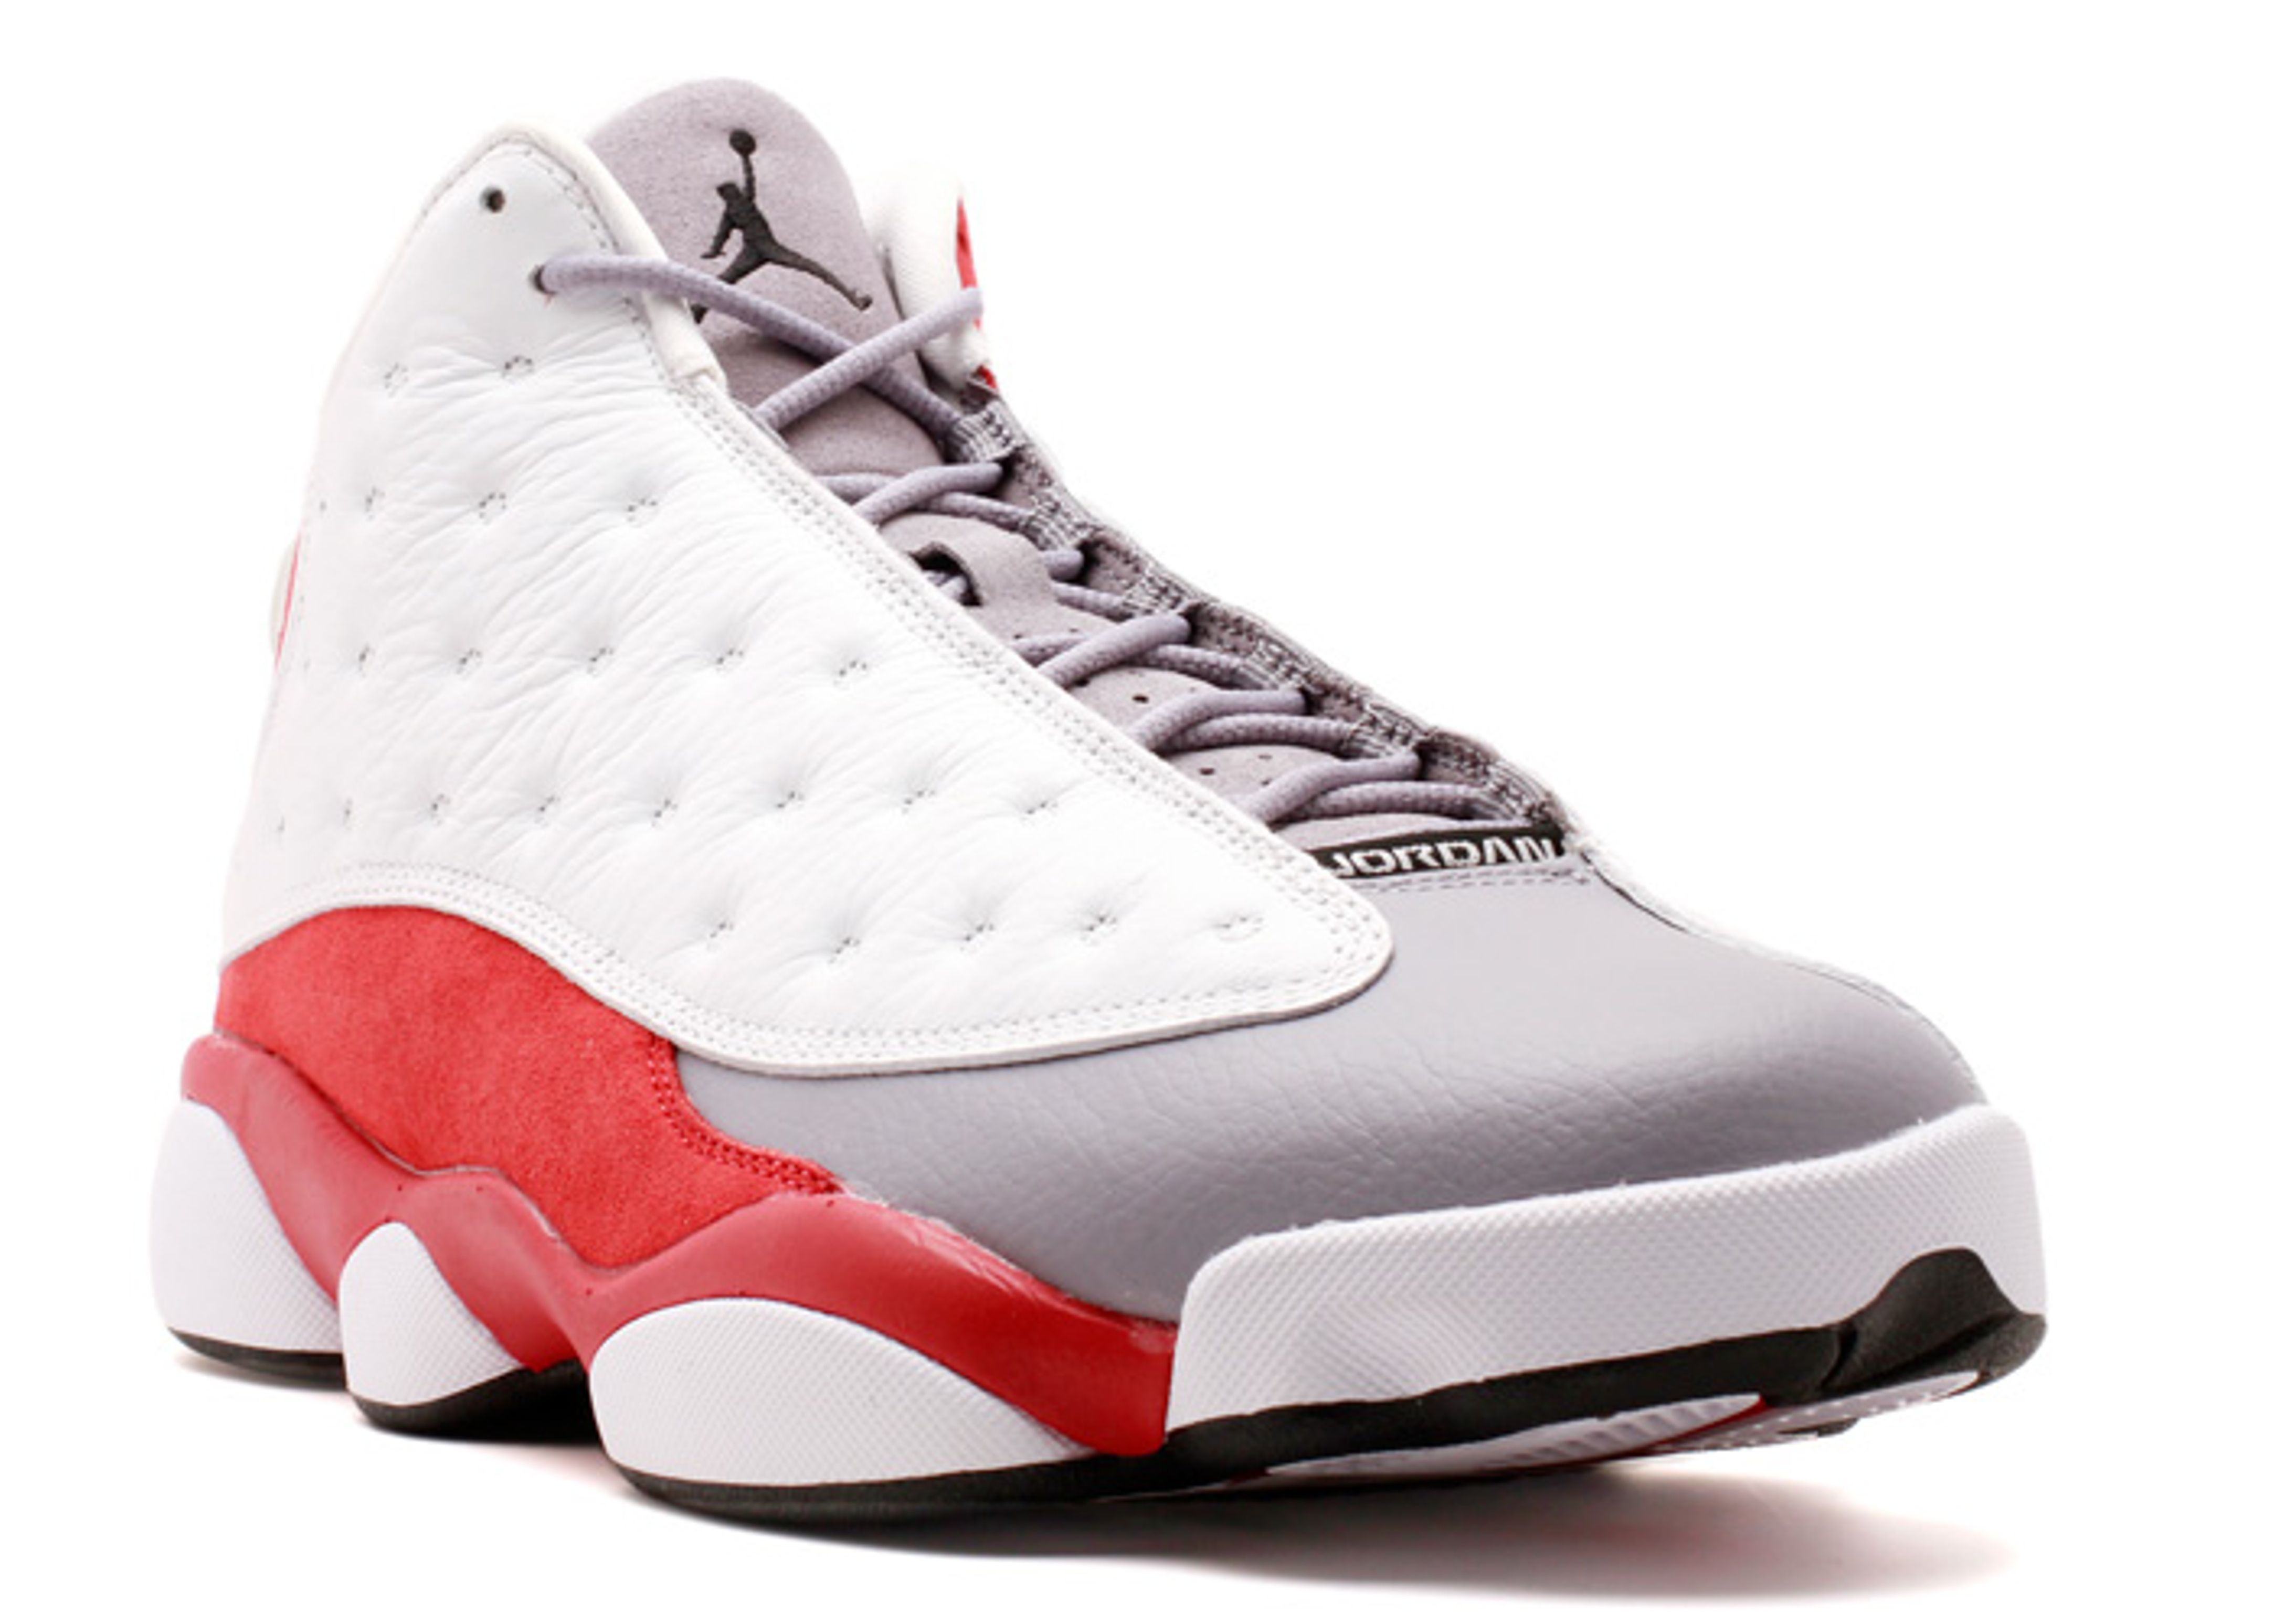 white grey and red jordan 13s